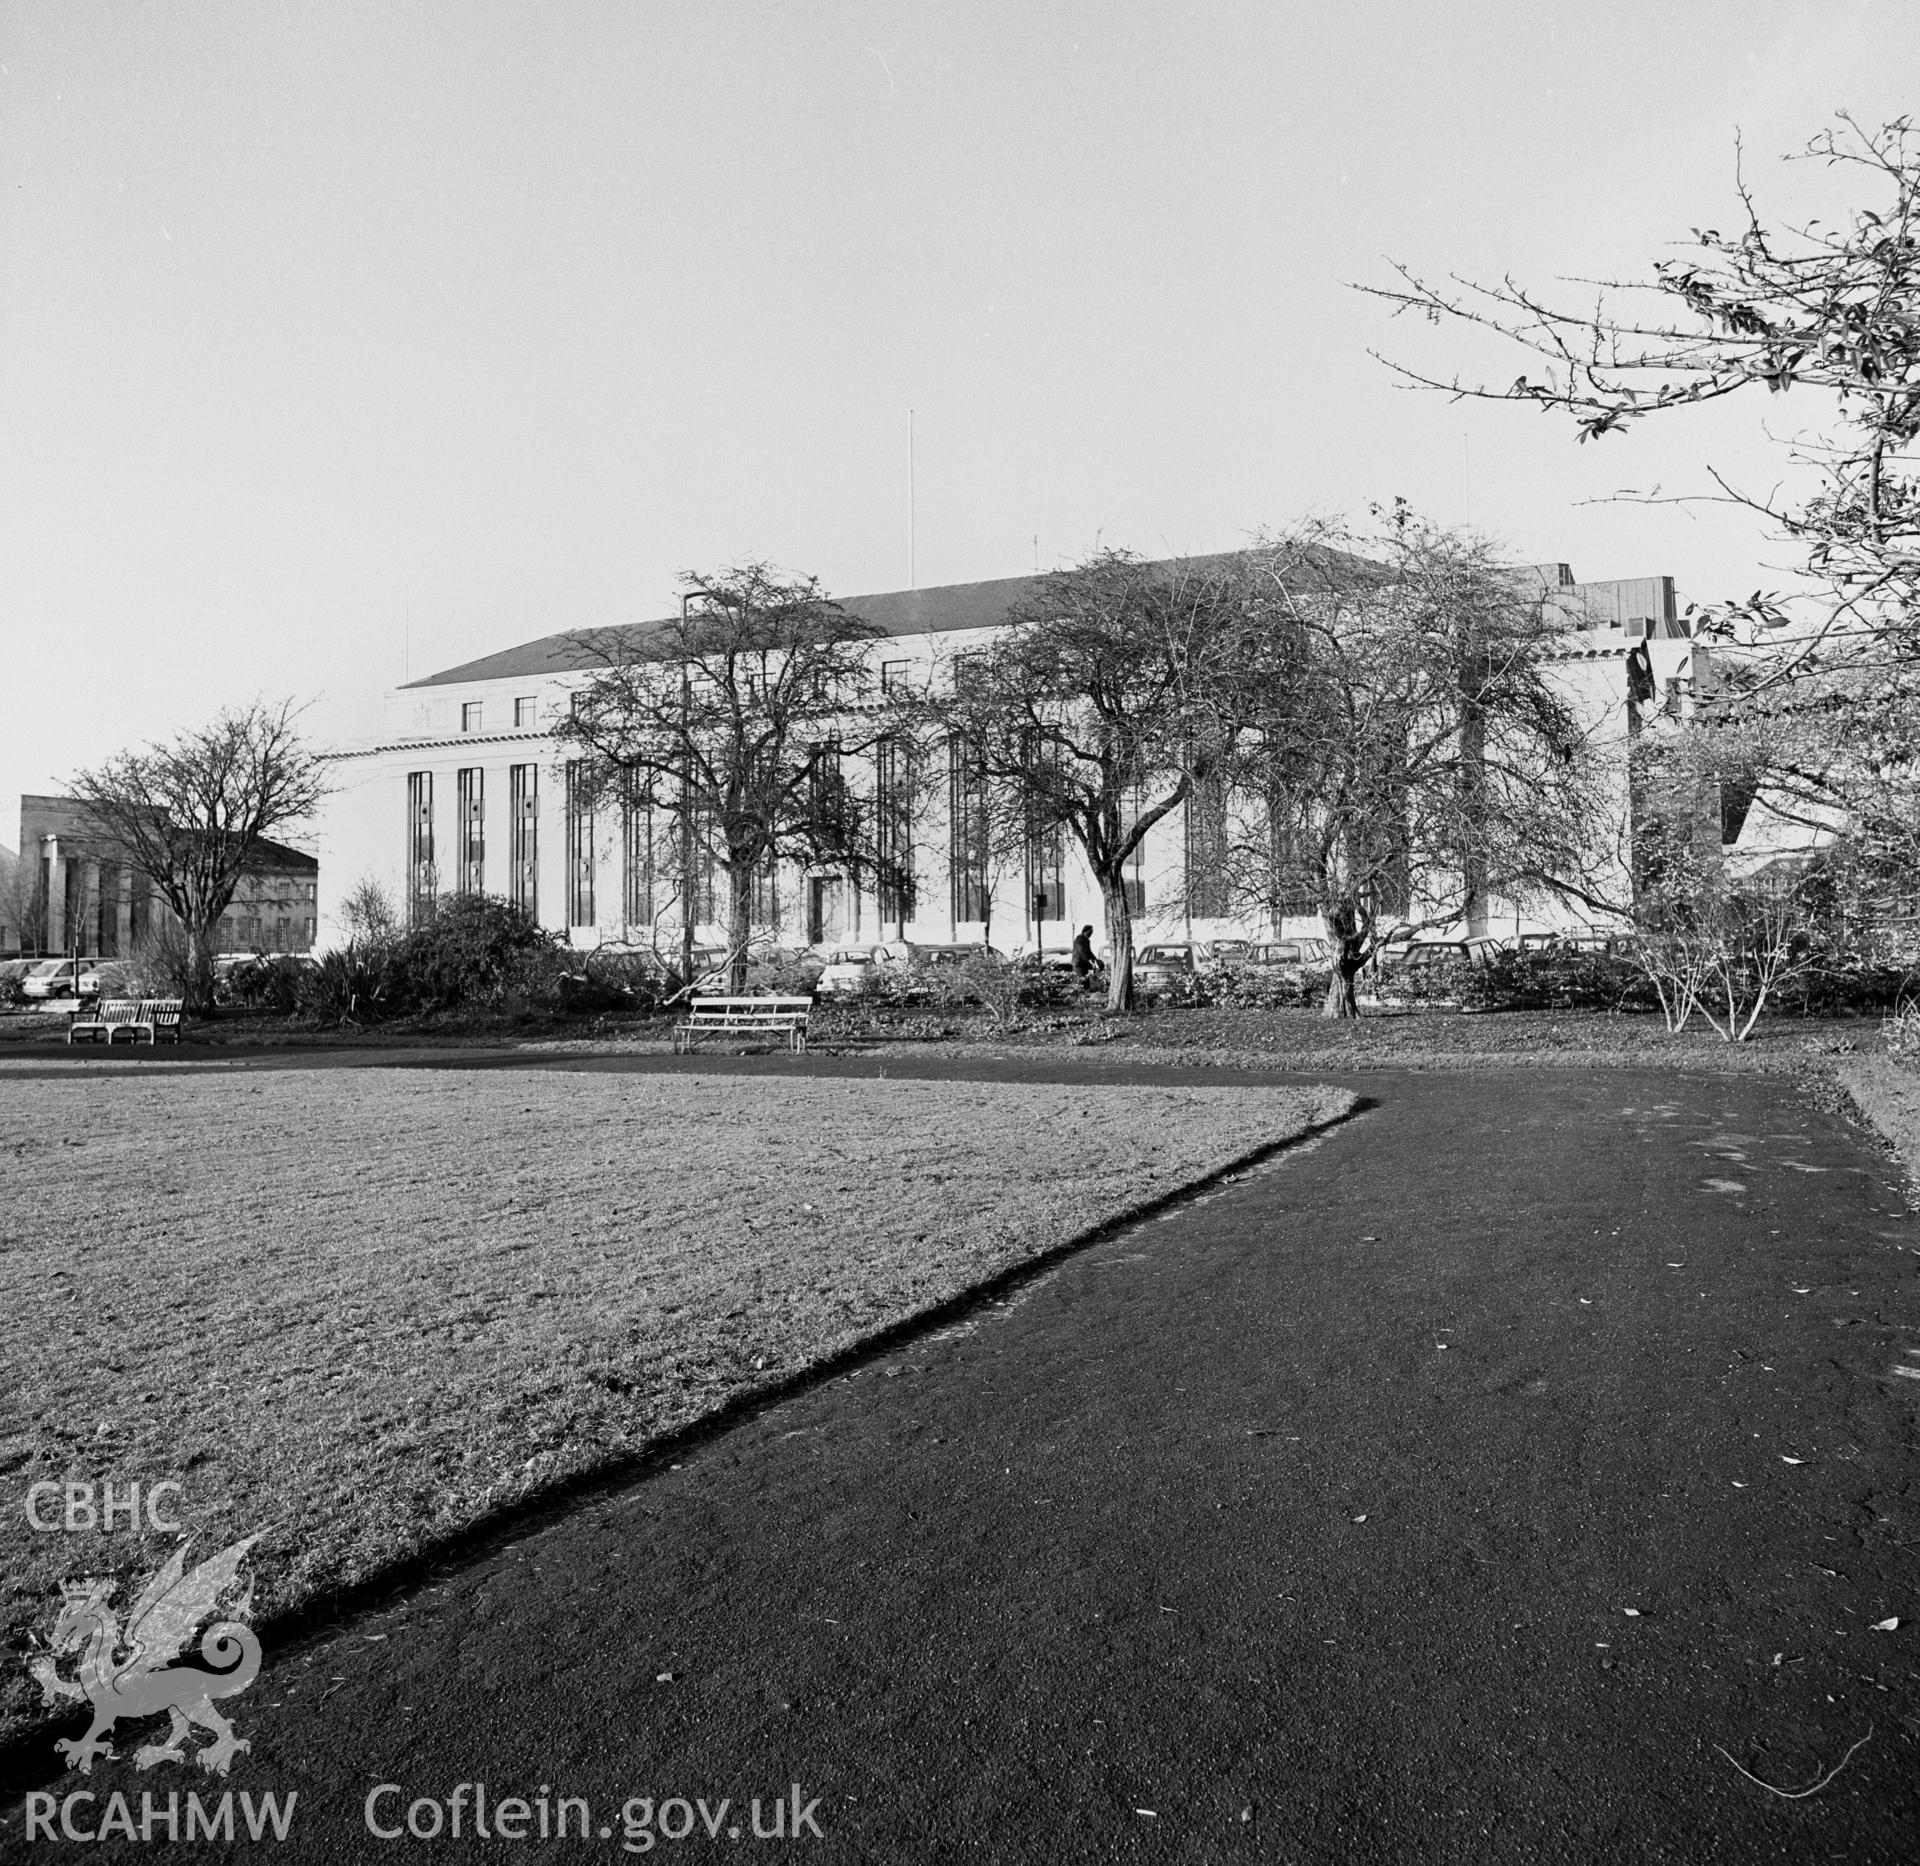 Photographic negative showing view of the Welsh Office building, Cathays Park, Cardiff; collated by the former Central Office of Information.